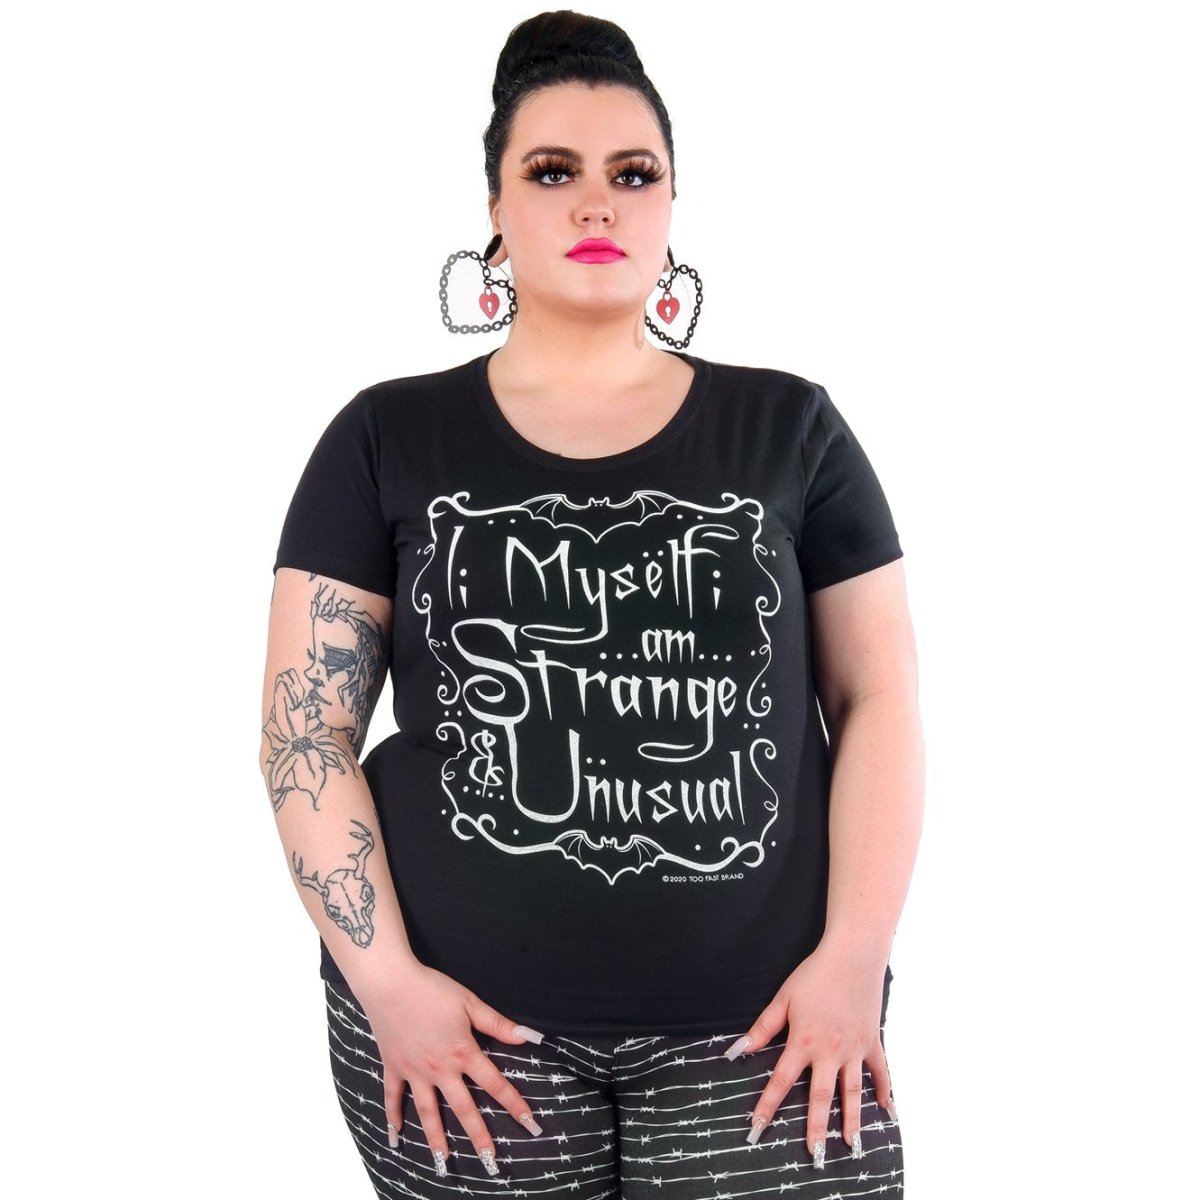 Buy Mall Goth Clothing Trad Goth Clothing. Plus Size Goth. Goth Girl T  Shirt. Gifts for Goths. Goth Clothes Men and Women Alternative Clothing  Online in India 